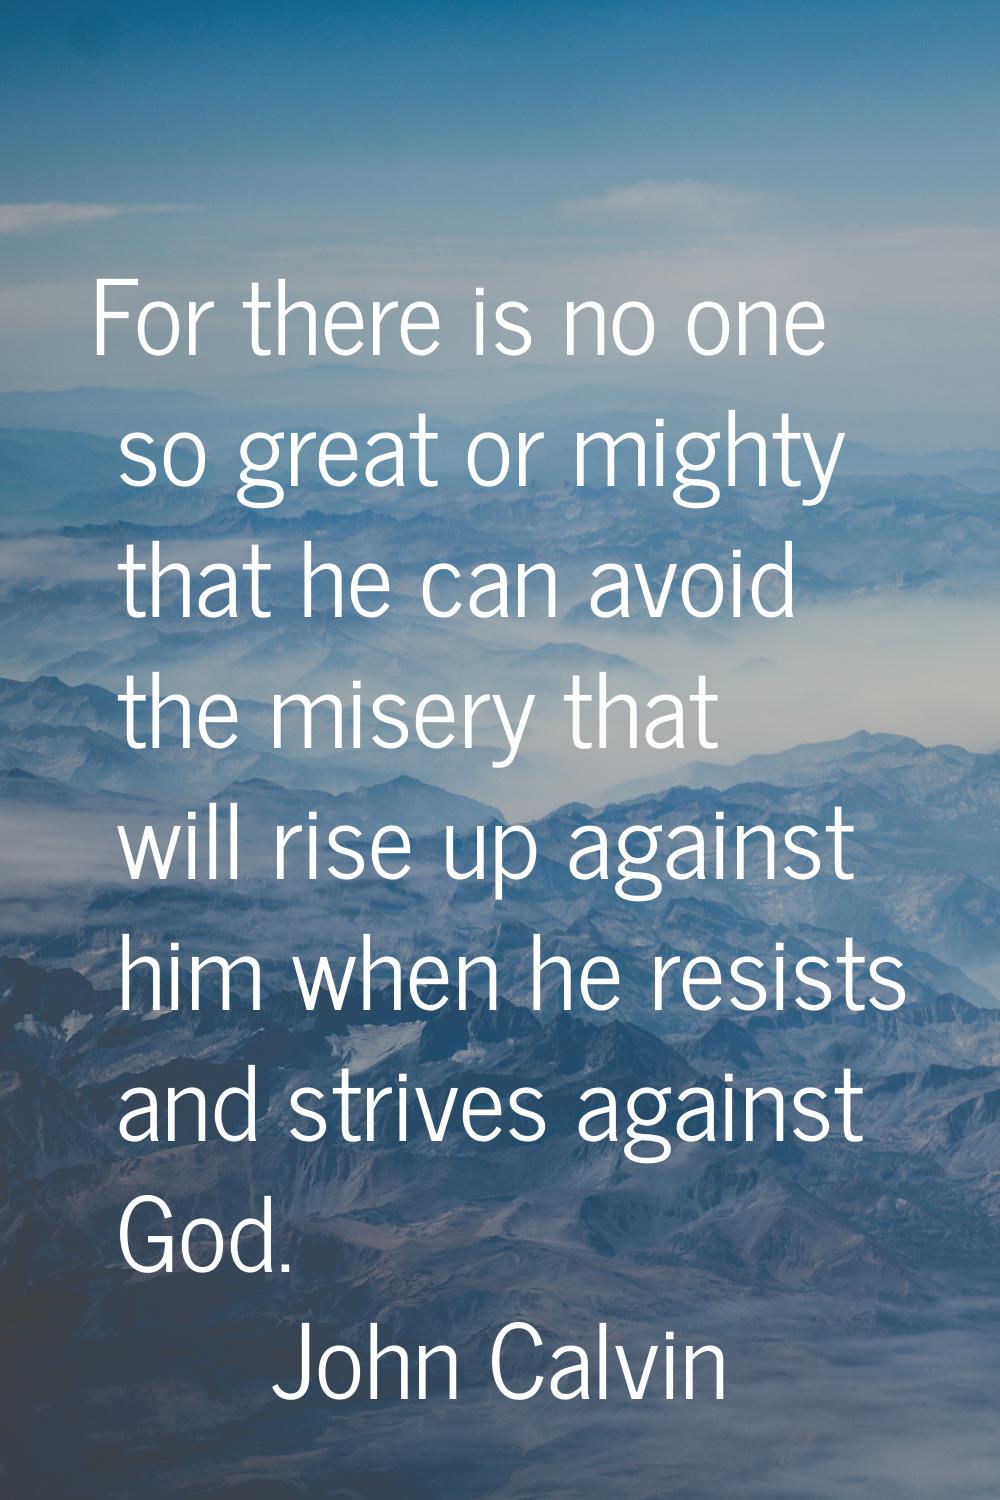 For there is no one so great or mighty that he can avoid the misery that will rise up against him w